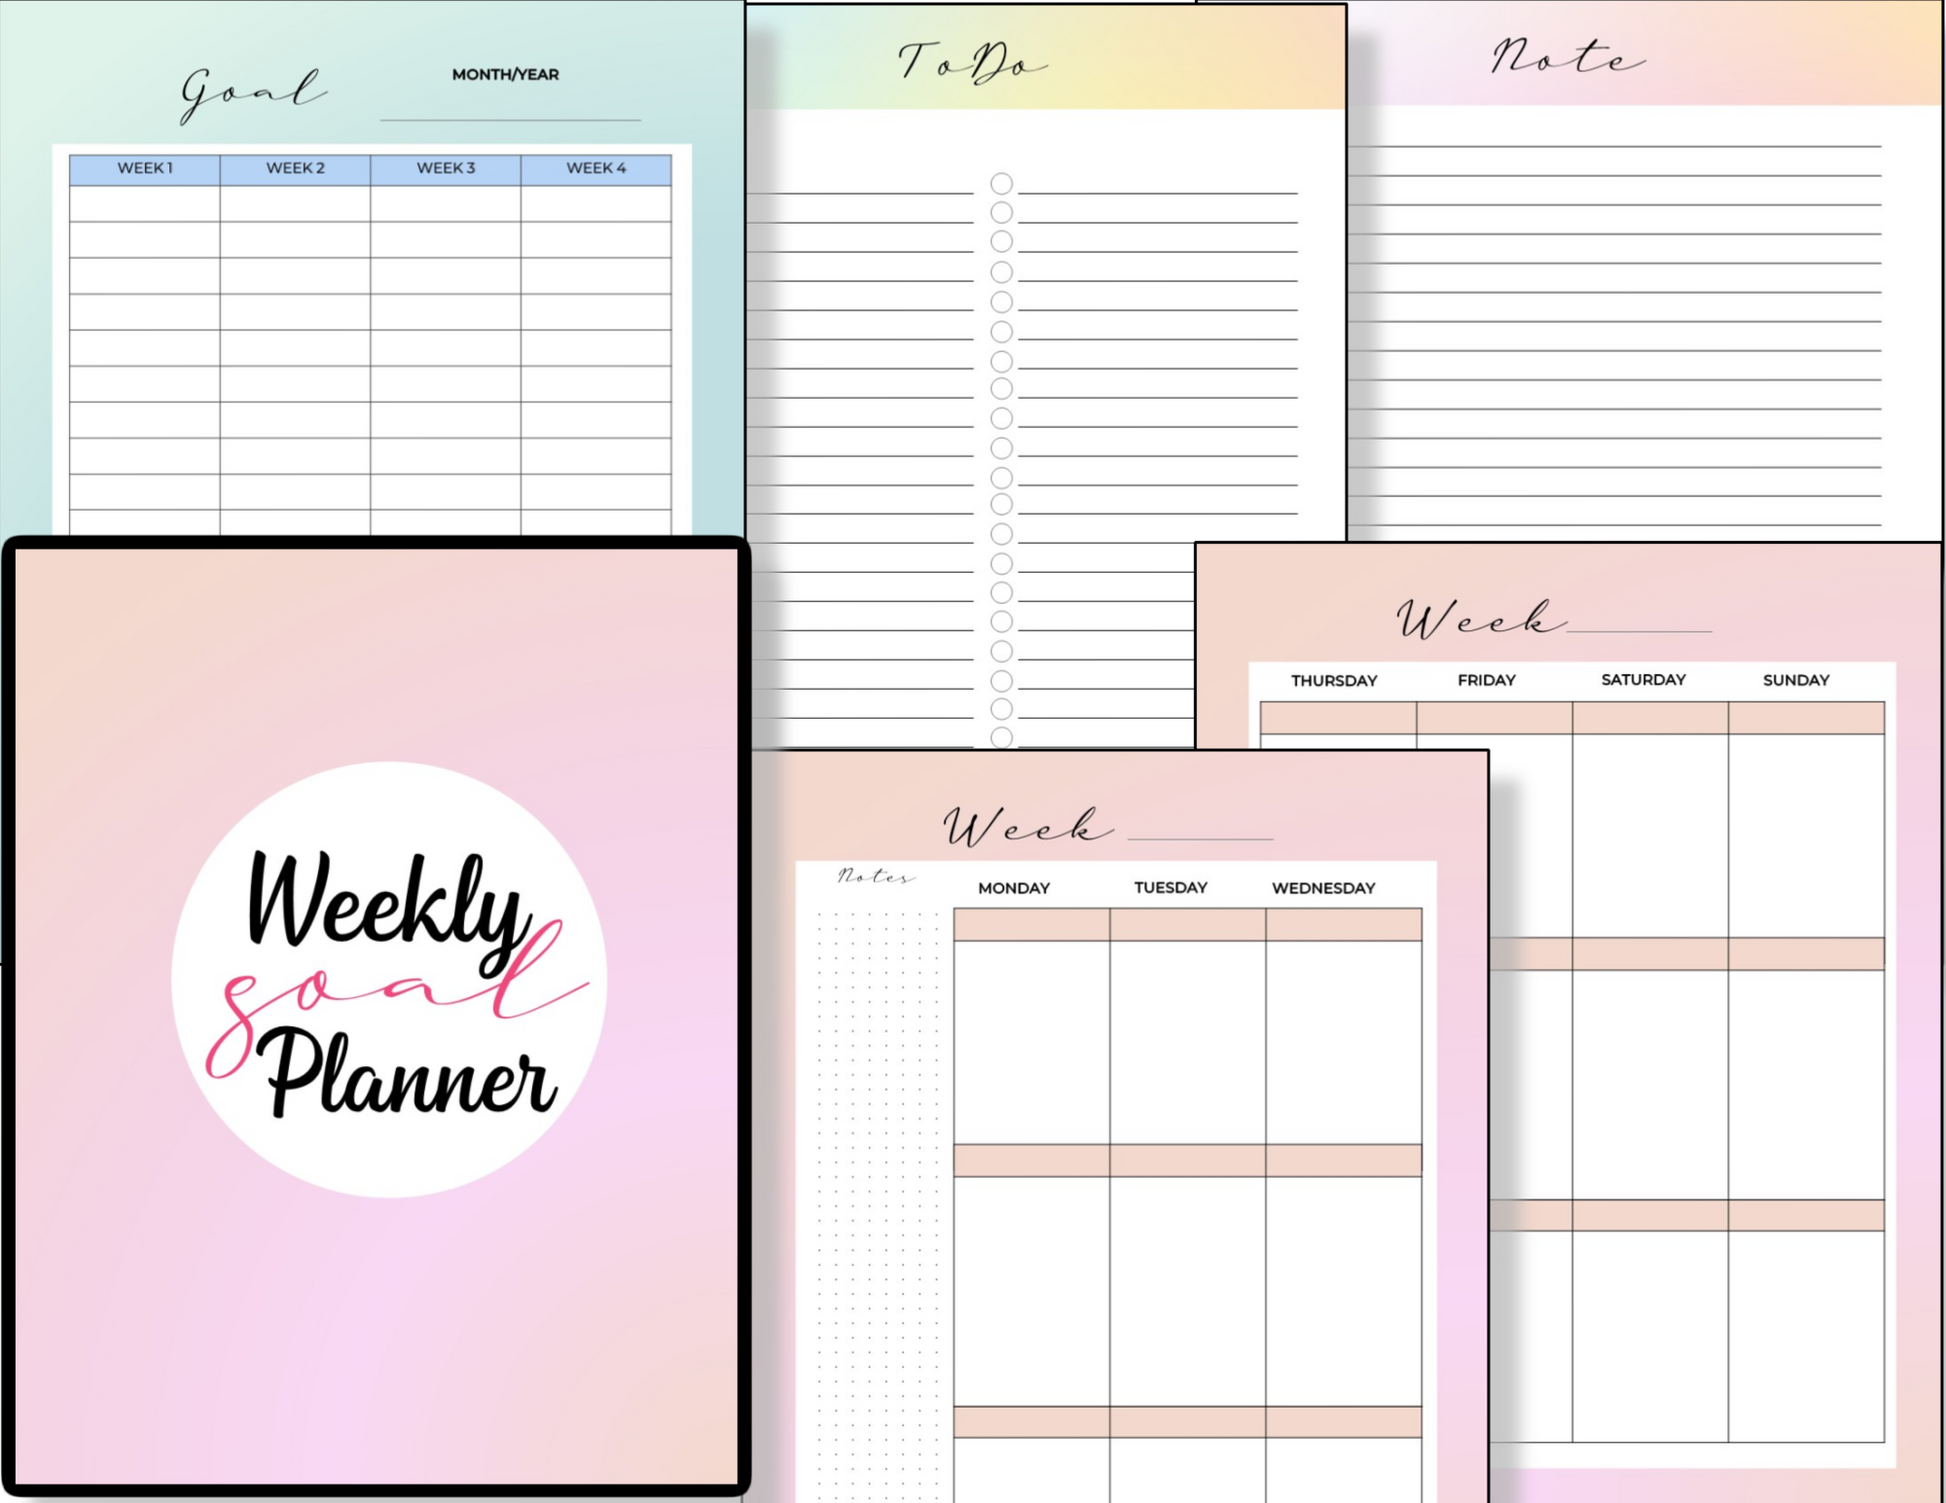 A high-resolution digital product, featuring a Weekly Goal Planner with a pink and blue cover, from the Organized 31 Shop.